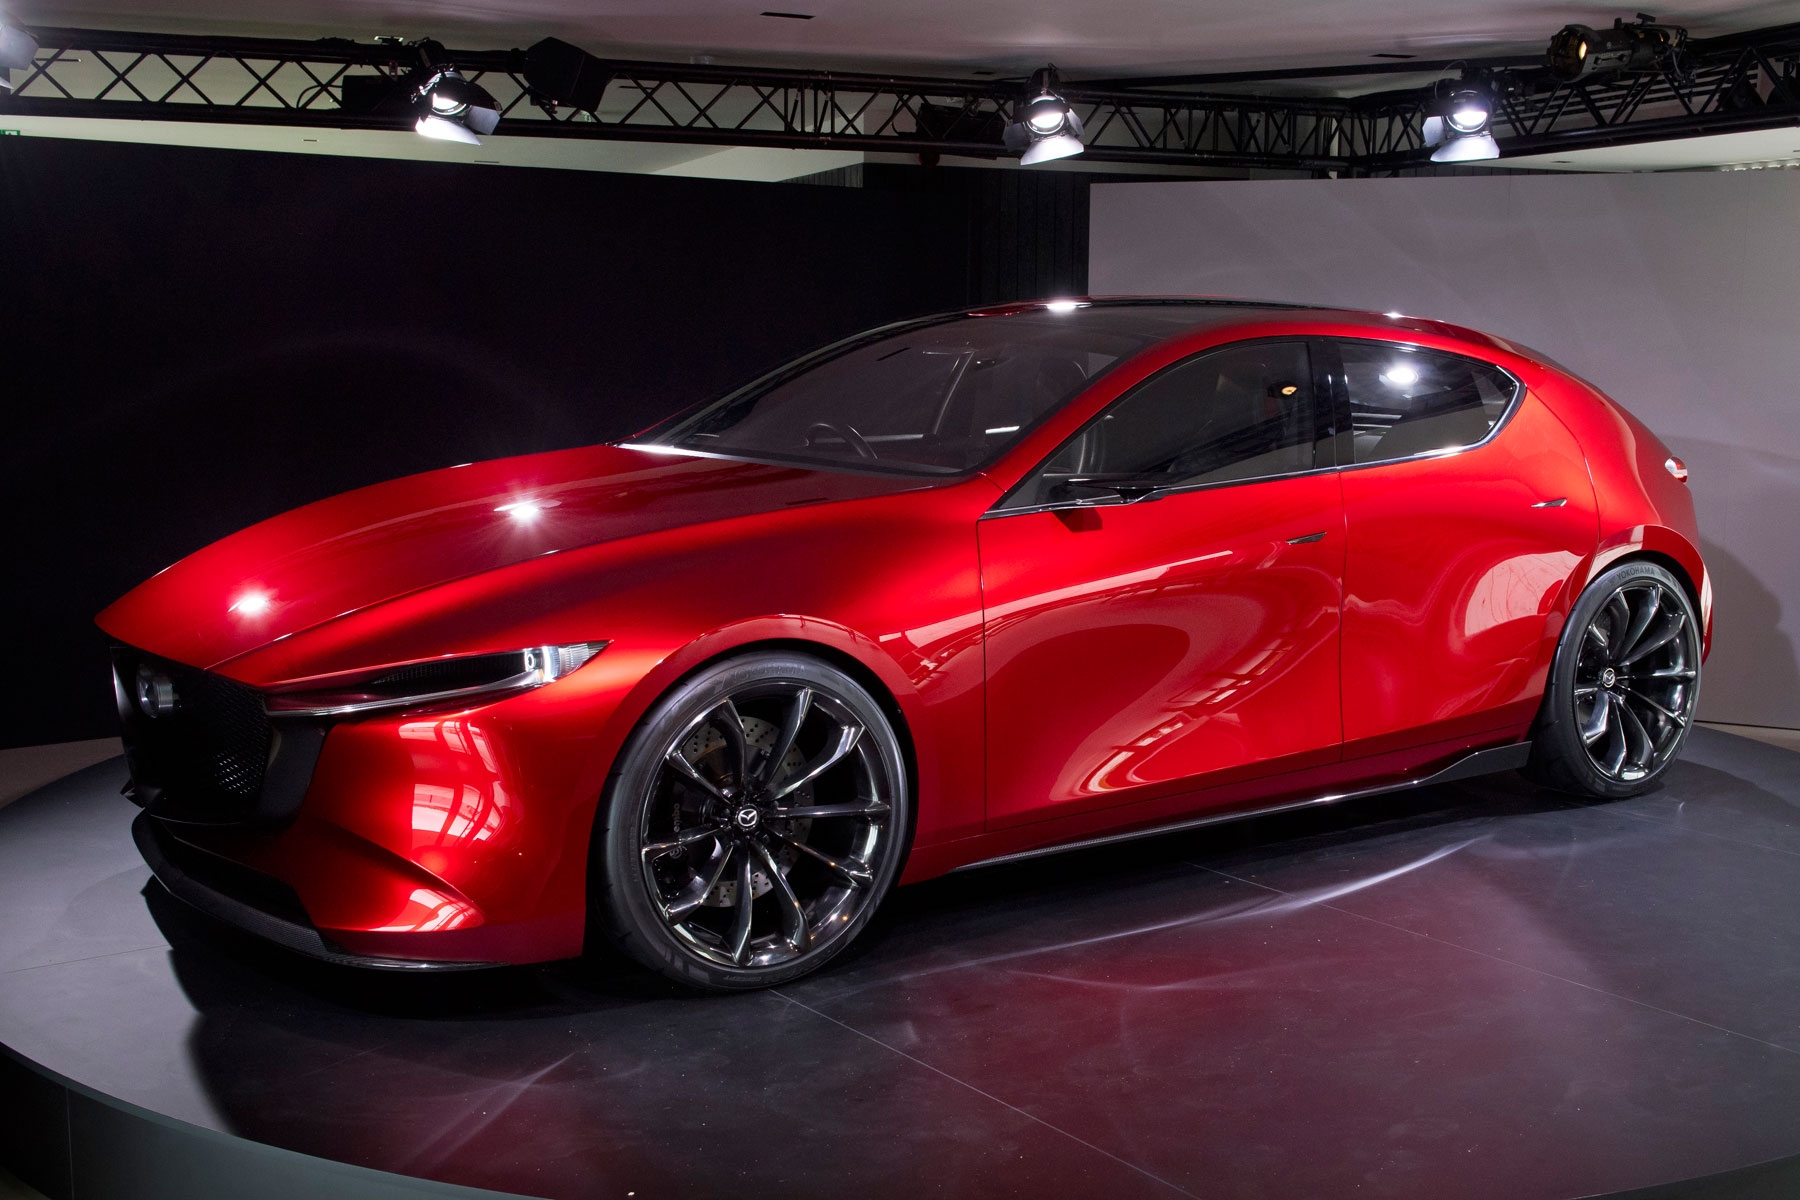 Mazda’s new SkyactivX engine proves there’s a future in